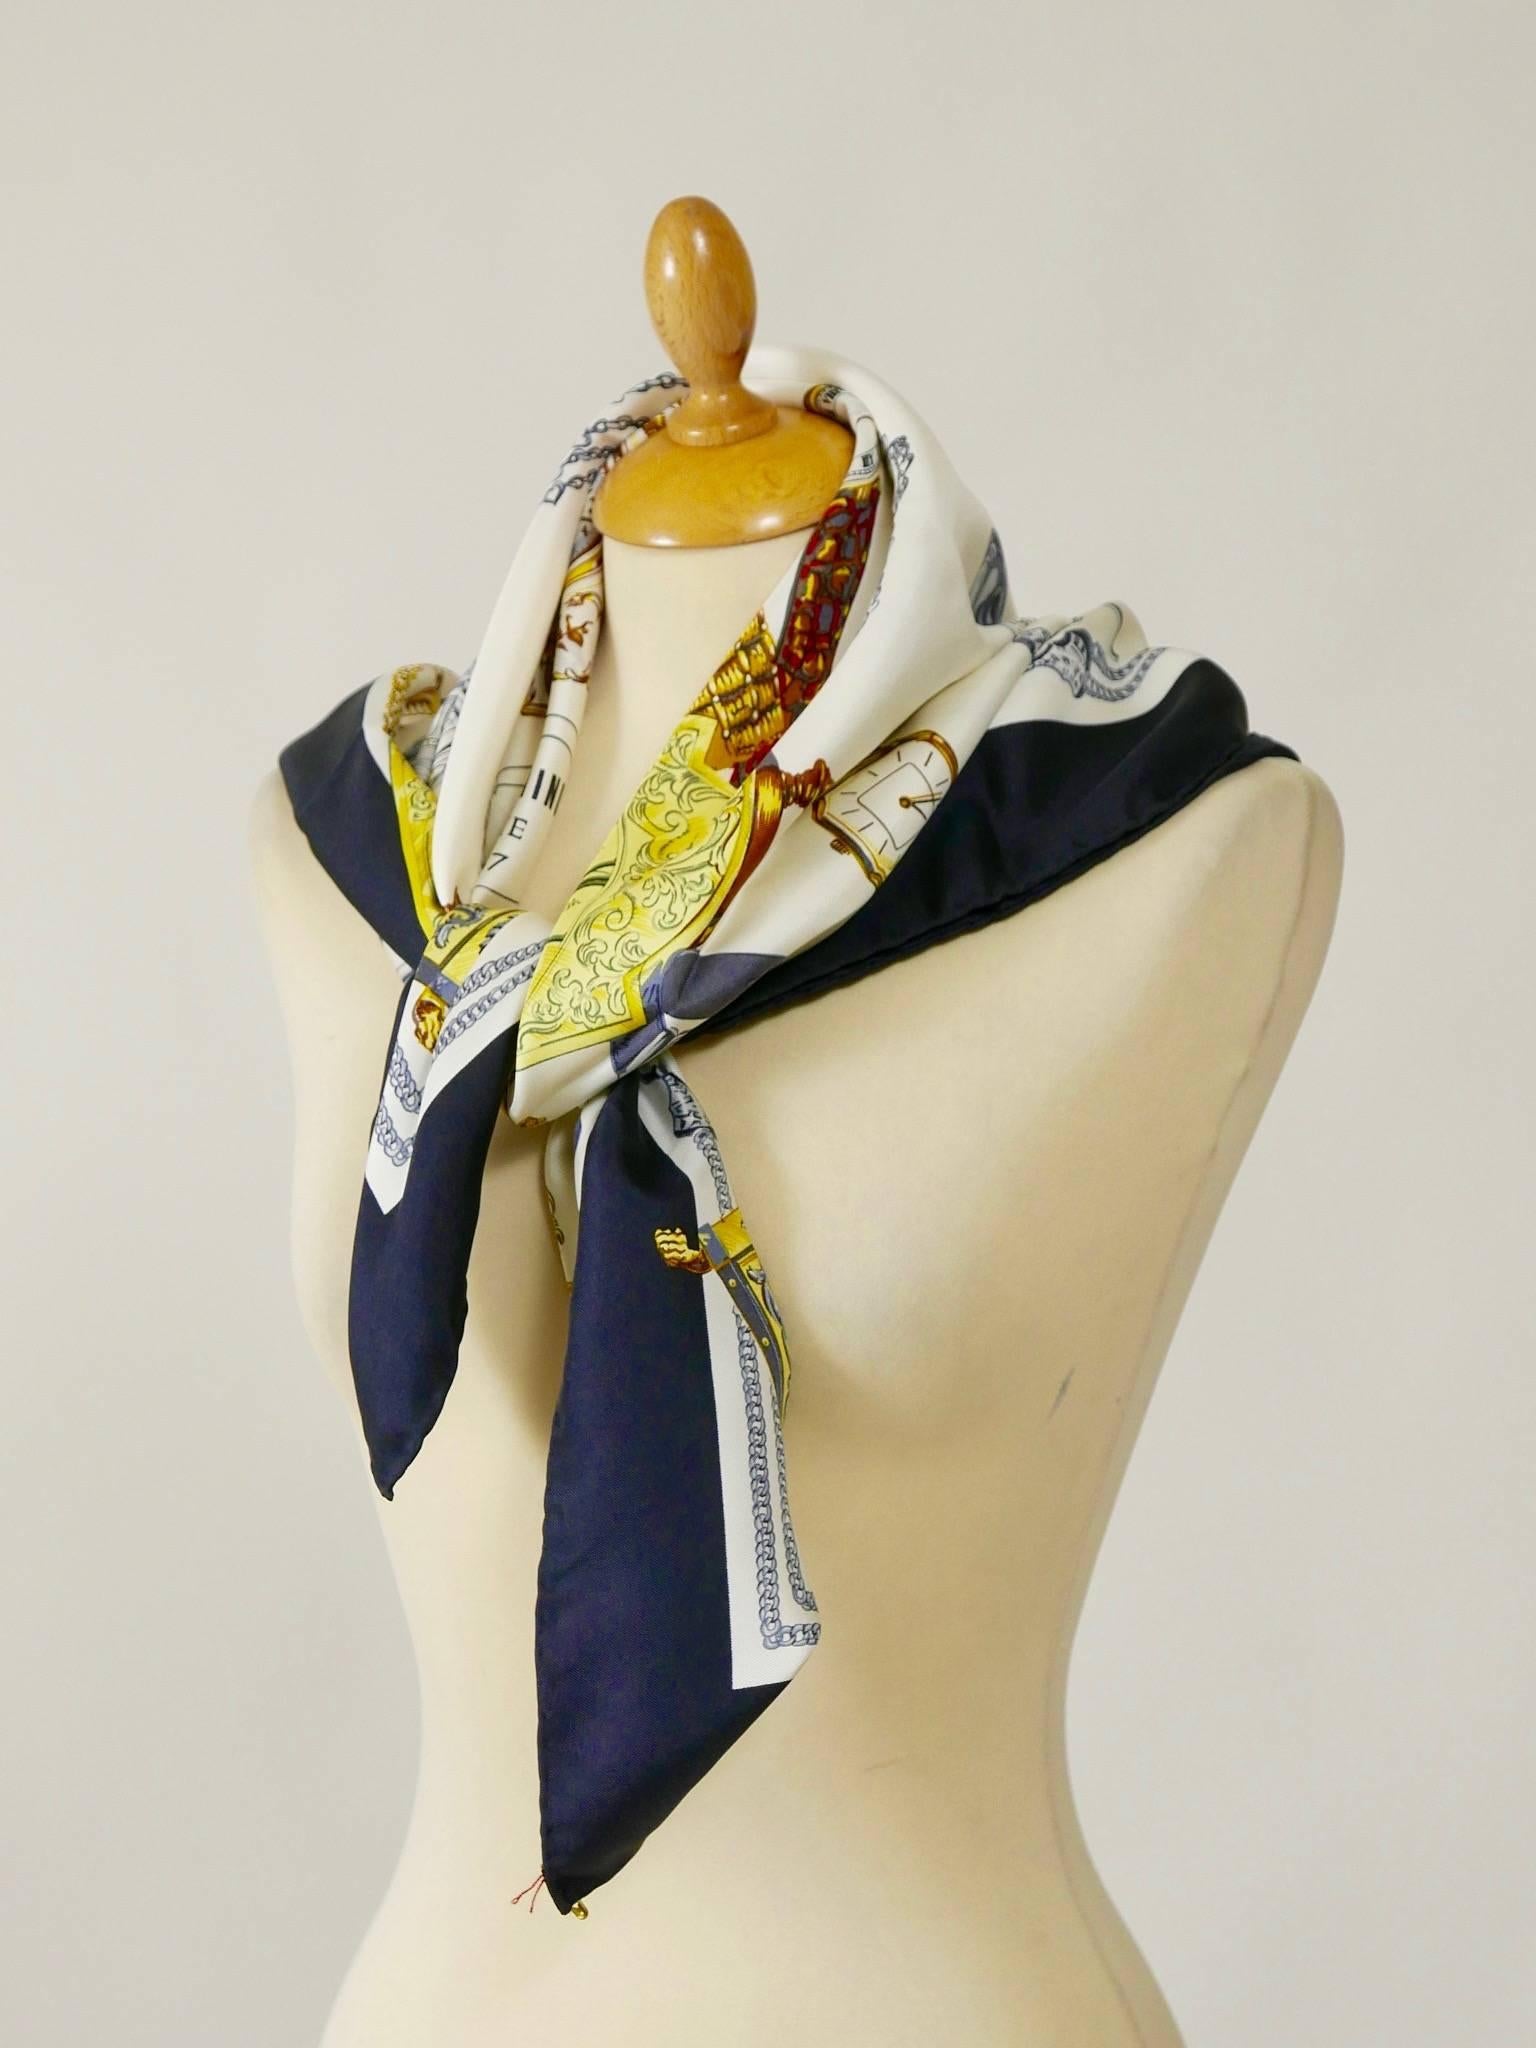 This lovely Moschino 1987 scarf is 100% silk and has watch and wall clock print.

Very good Vintage condition

Label: Albisetti Como - Made in Italy

MEASUREMENTS:
34 x 34 inch
